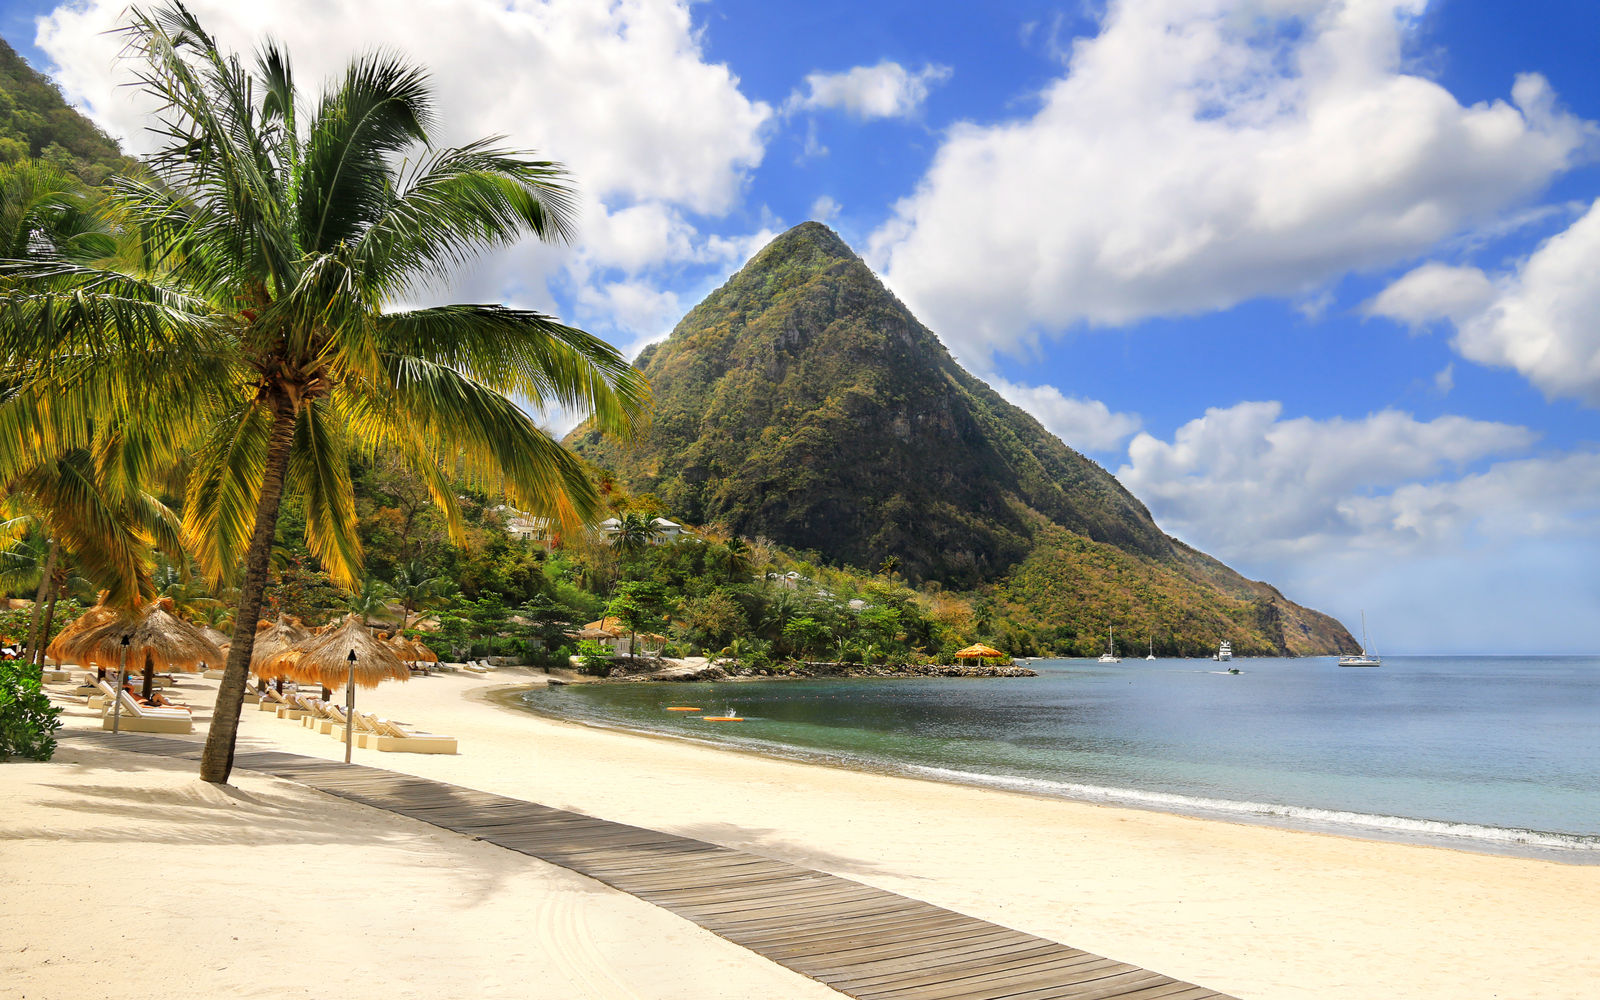 Gorgeous view of a white sand beach on one of the best places to visit in the Caribbean, St. Lucia